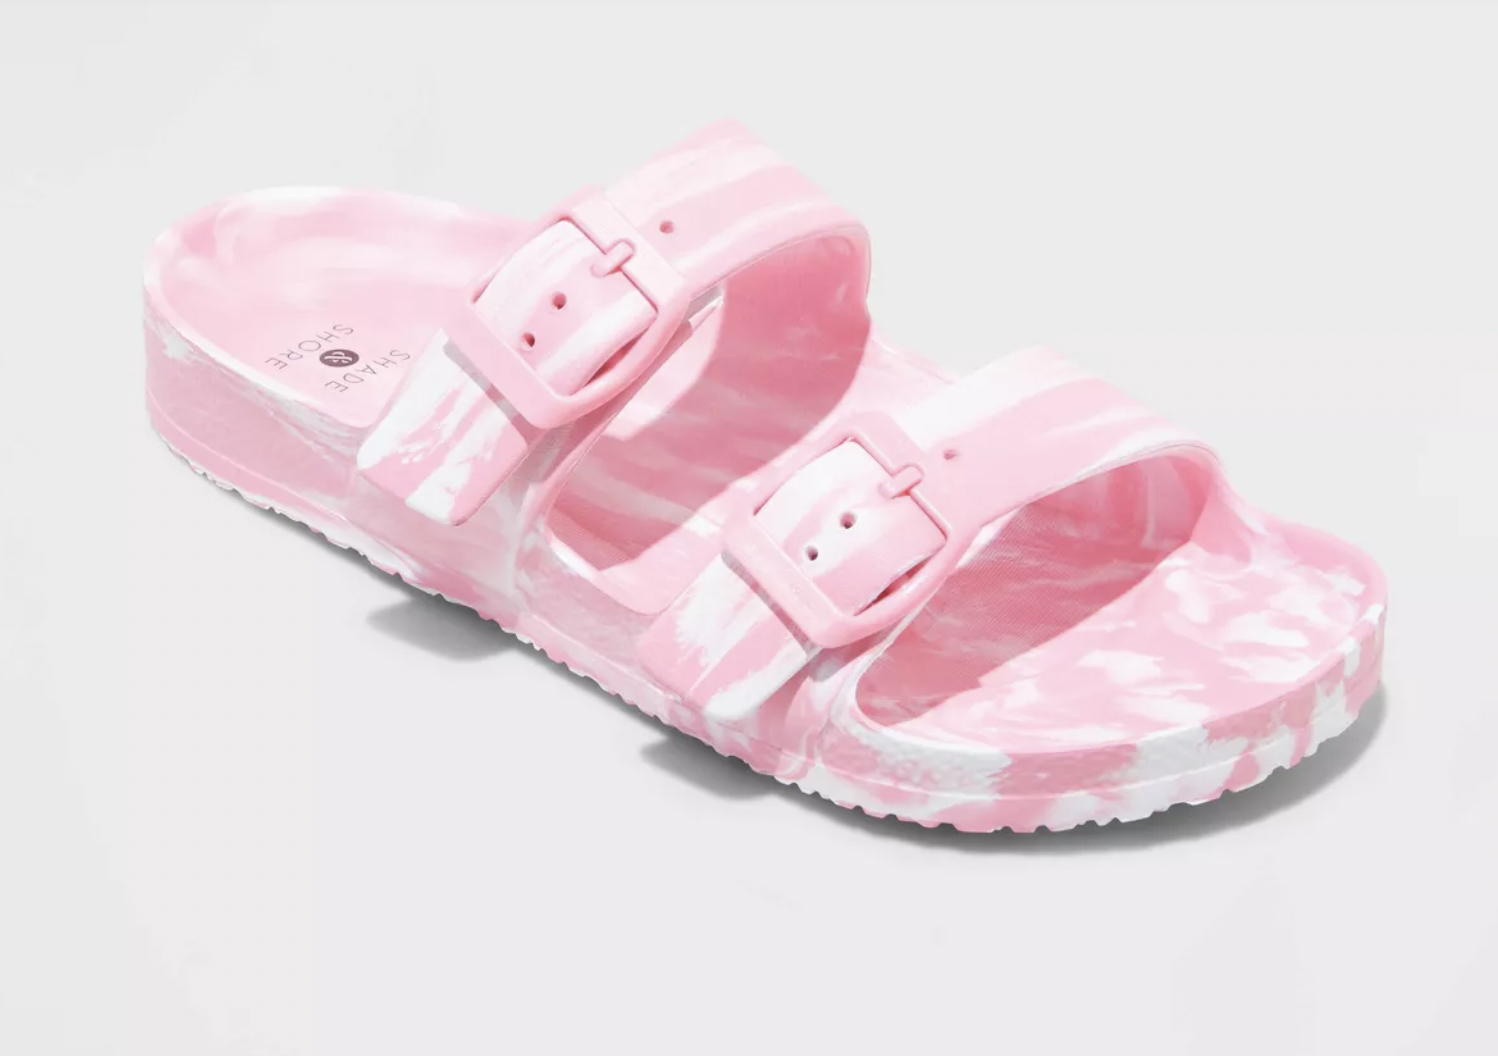 A pair of the sandals in pink